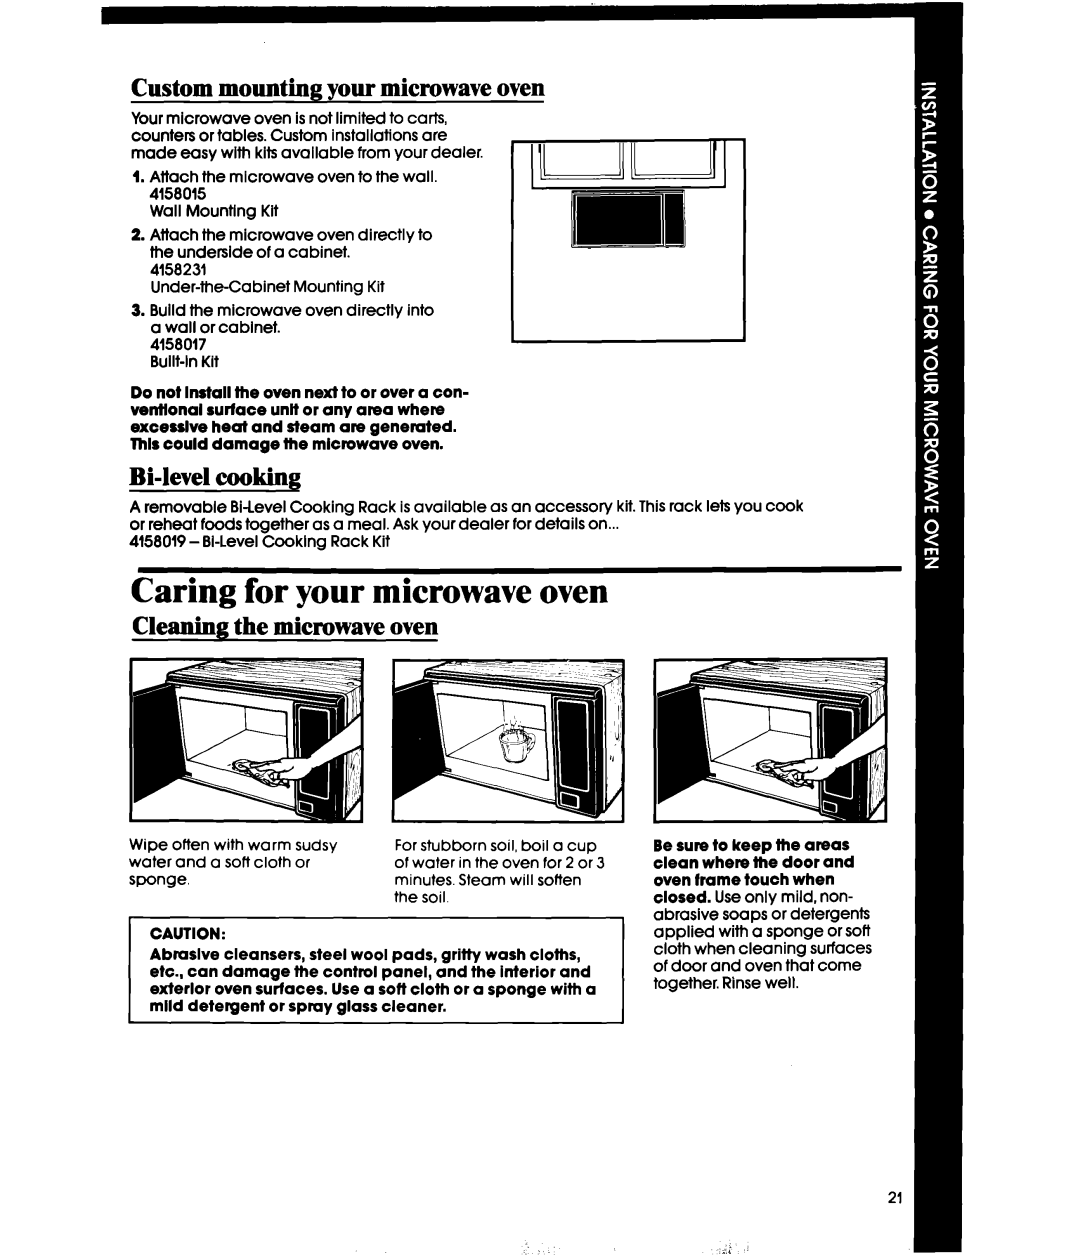 Whirlpool MW3500XS manual Caring for your microwave oven, Custom mounting your microwave oven, Bi-levelcooking 